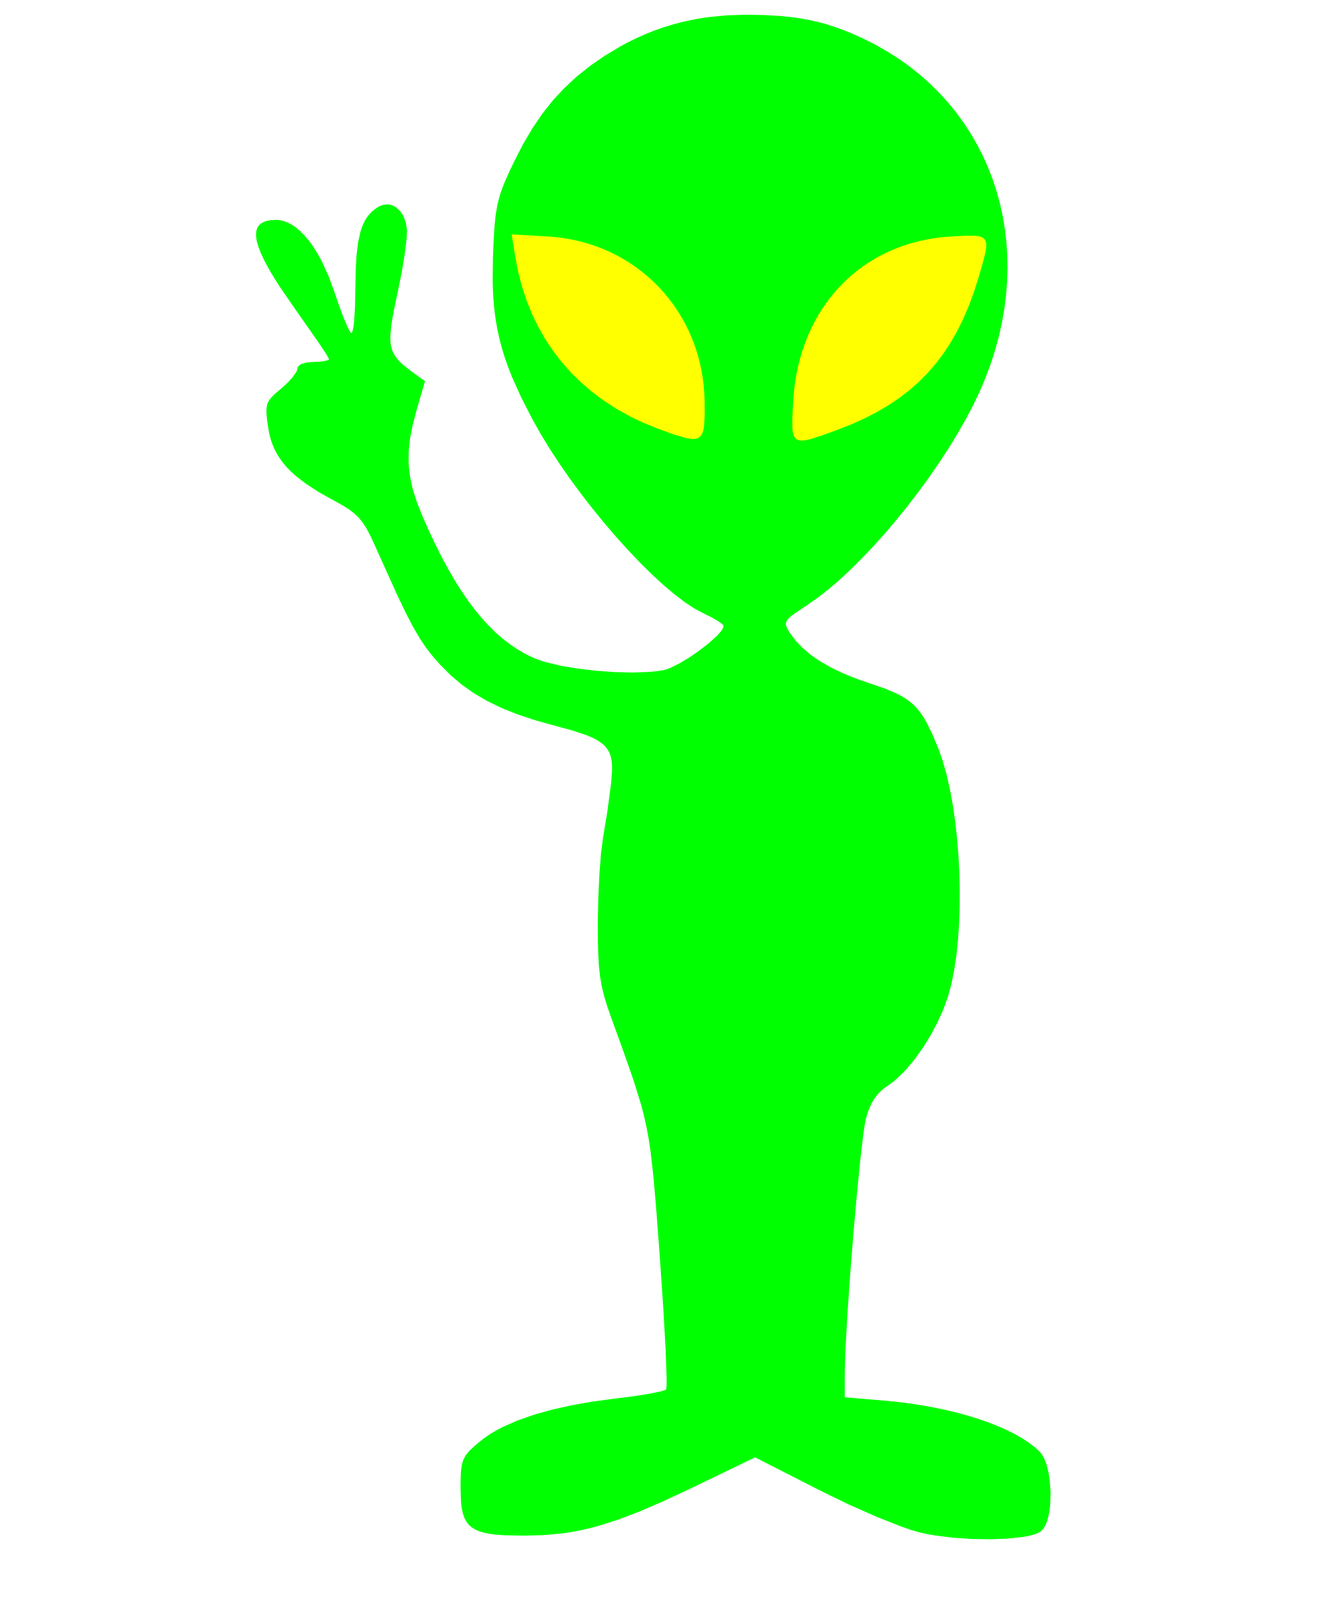 Png i want to. Spaceship clipart green alien